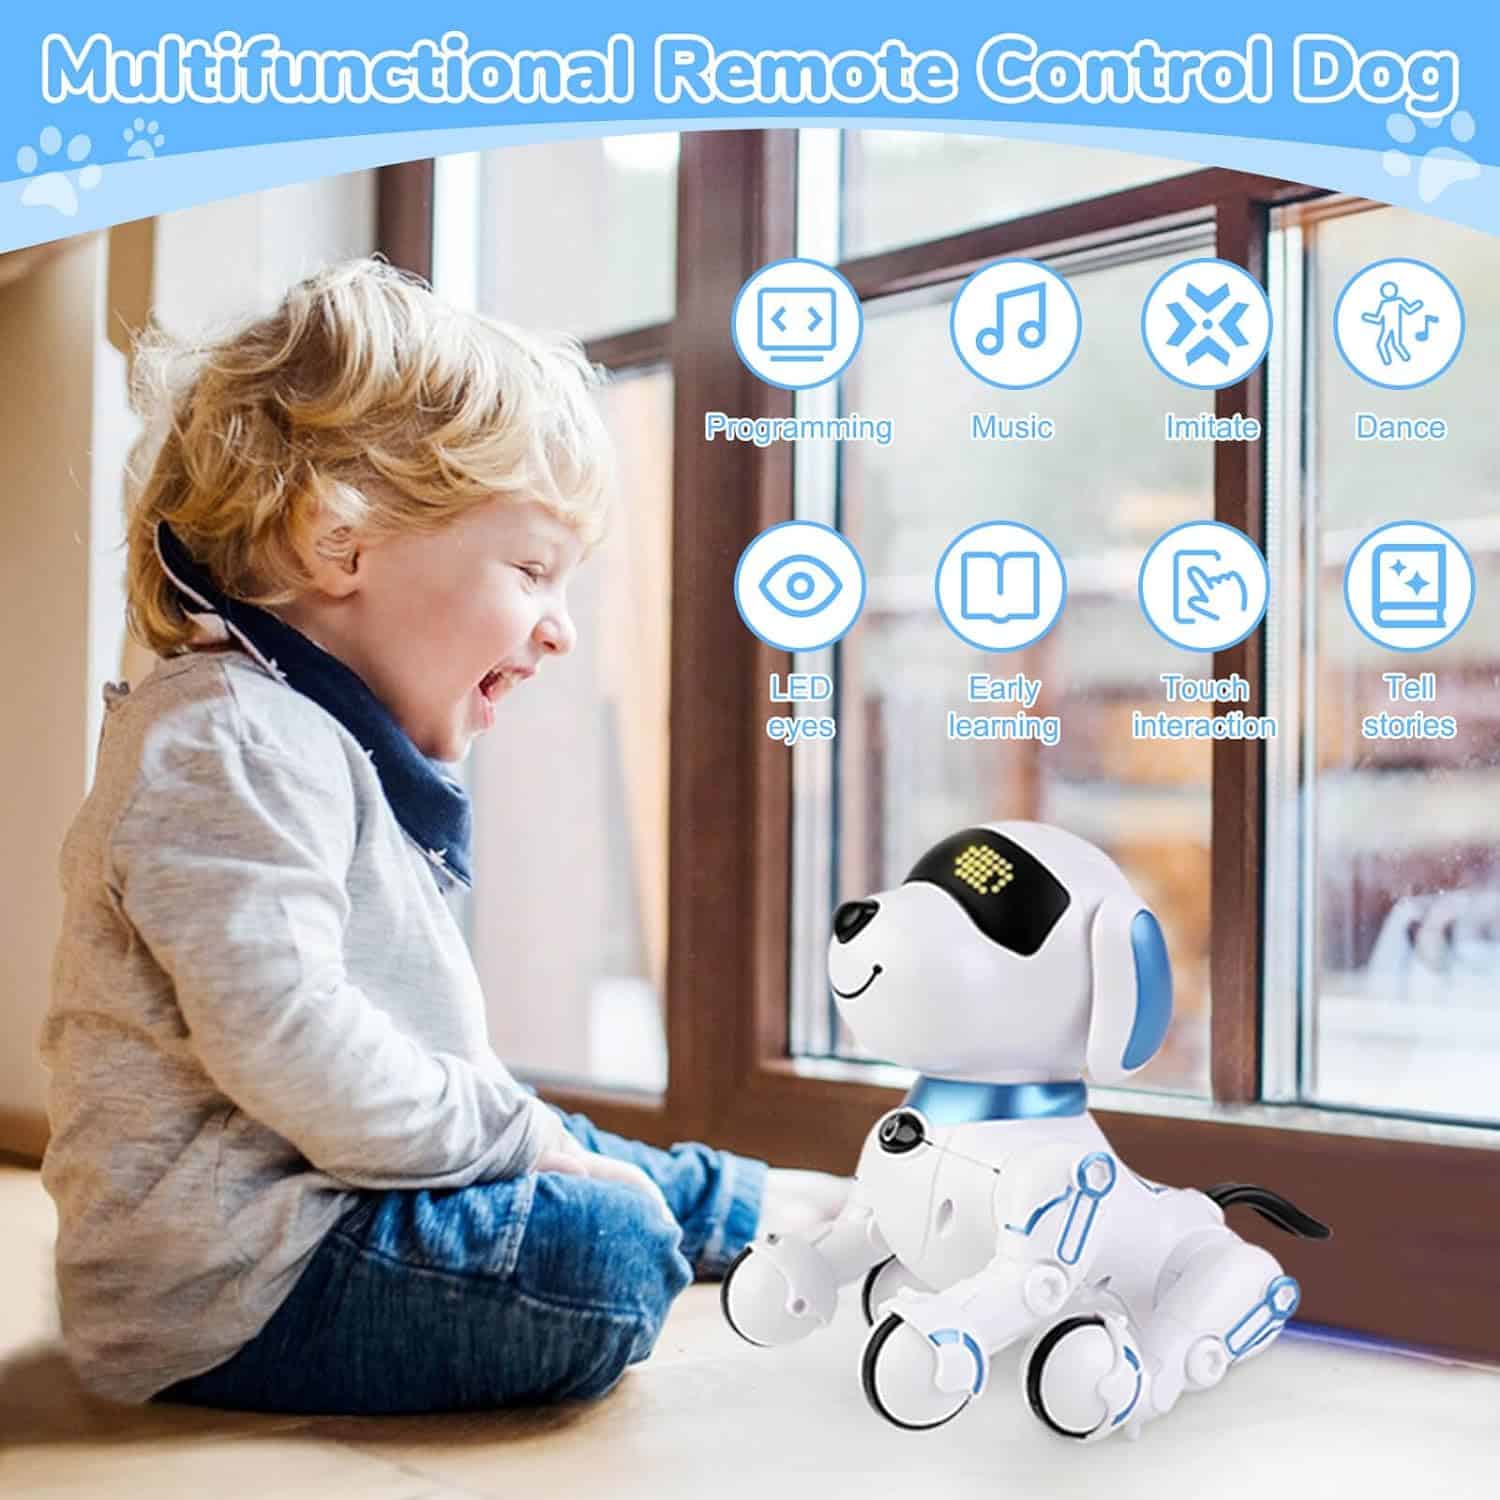 Britik Robot Dog Toys for Kids 8-12: A Fun and Educational Companion